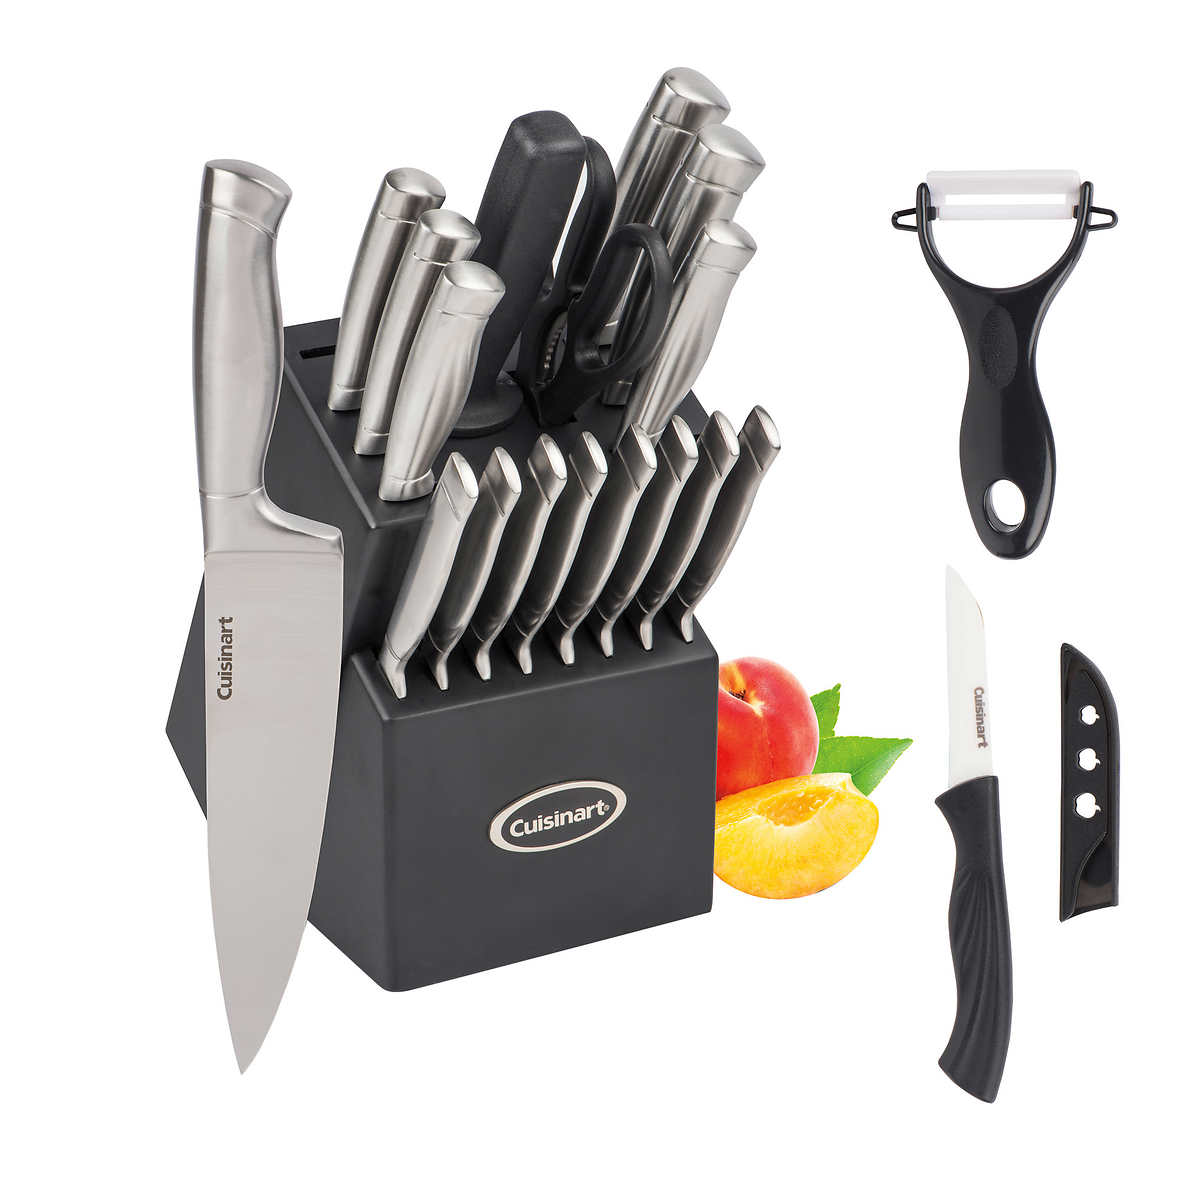 Featured image of post Cuisinart Knives Set Review : Geometric shapes and patterns also bring an artsy look to this colored knife set.